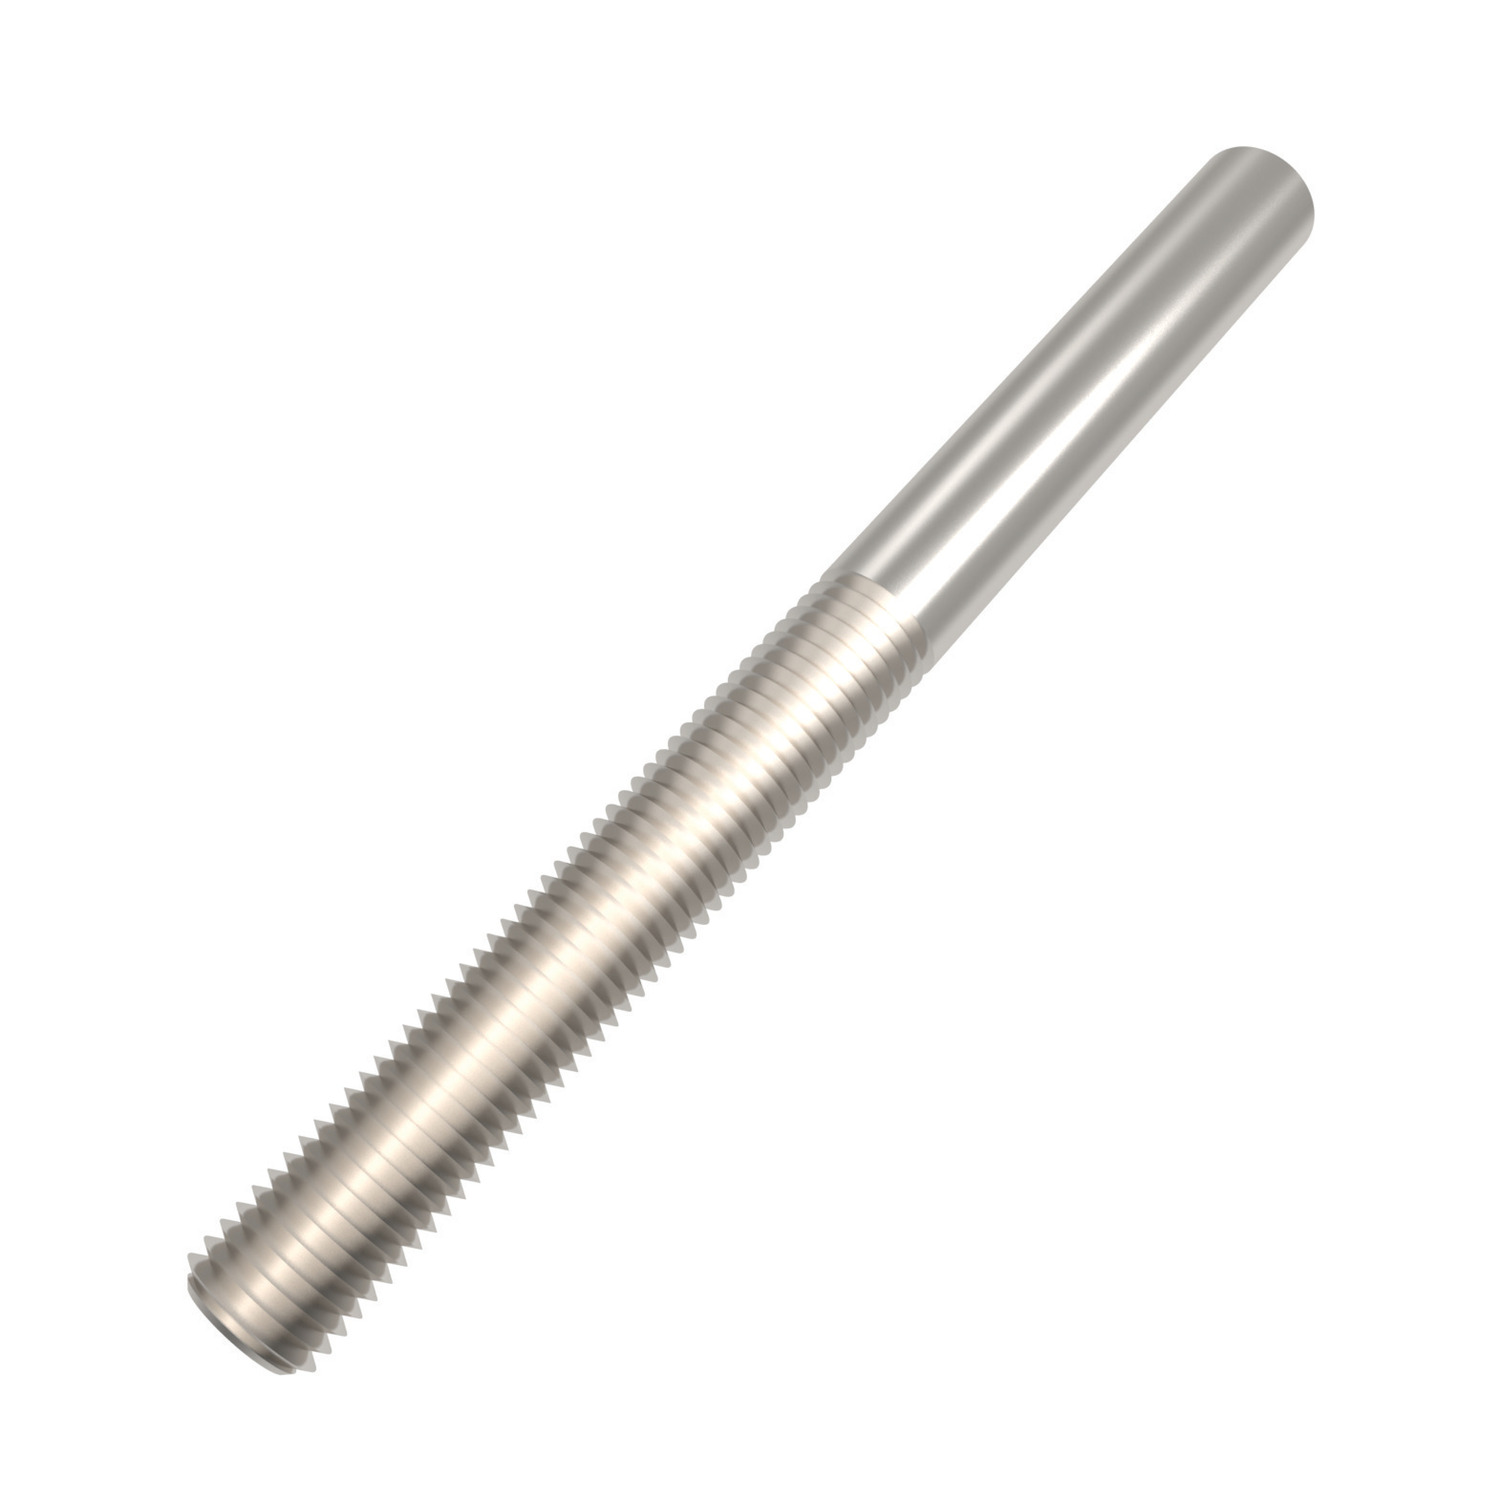 R3868.R016-A4 Welding Studs RH M16 A4 s/s Not to be used for lifting unless SWL marked.